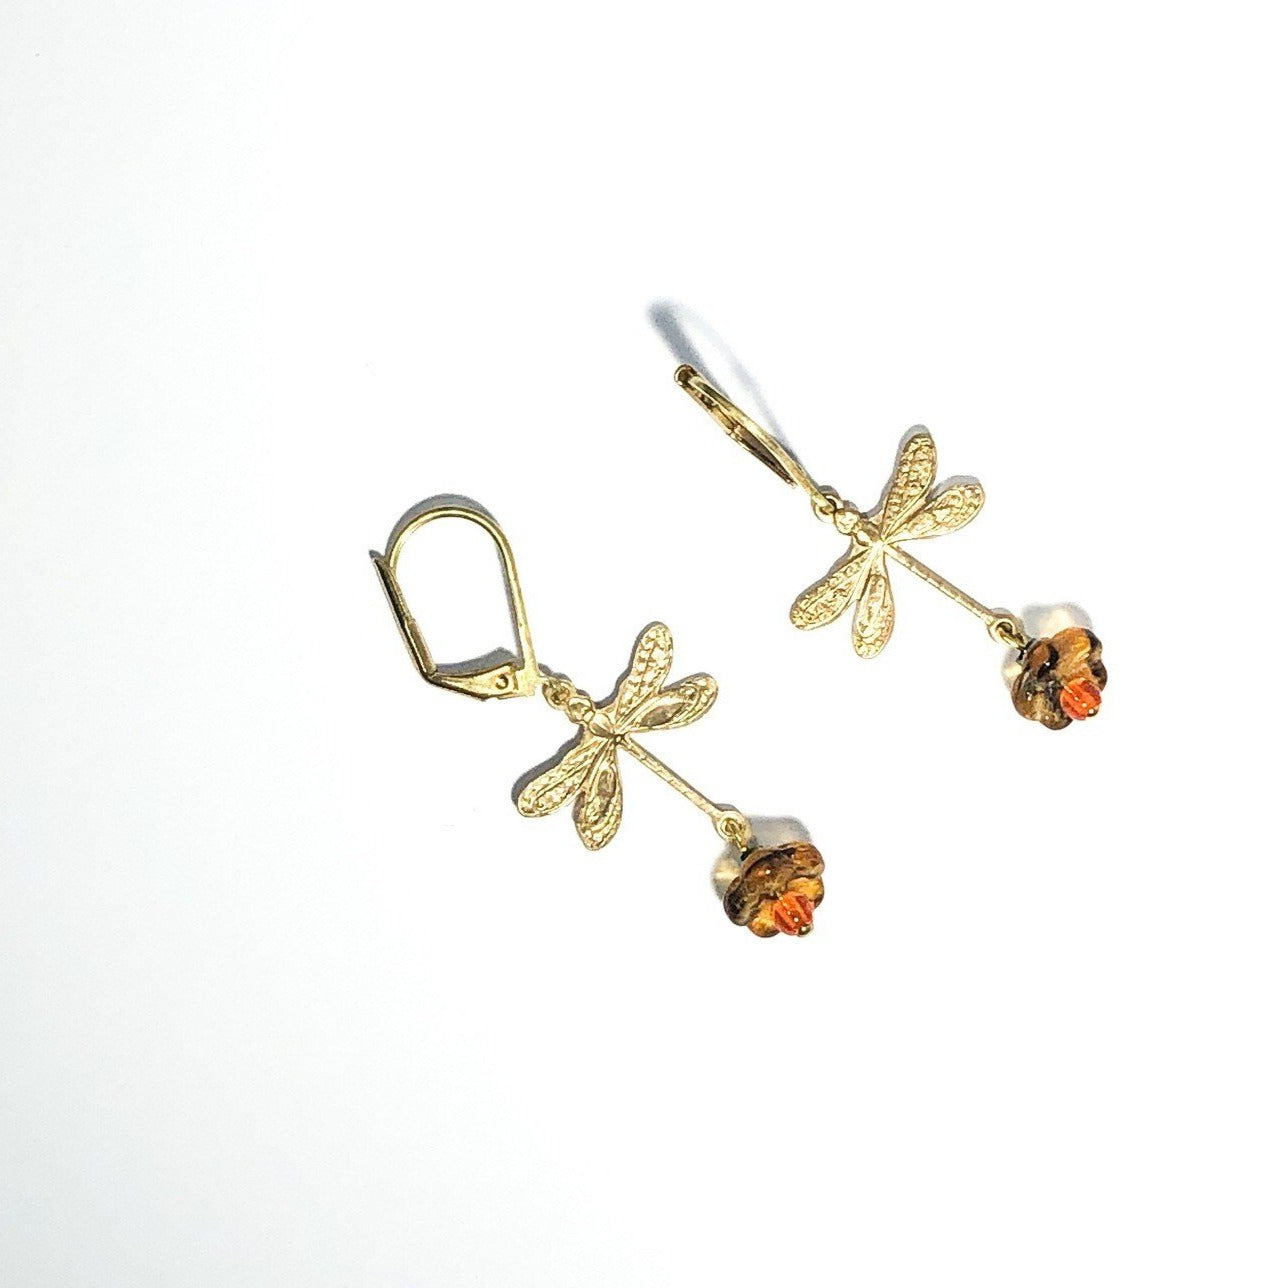 brass dragonfly earhangers with tangerine colored stone